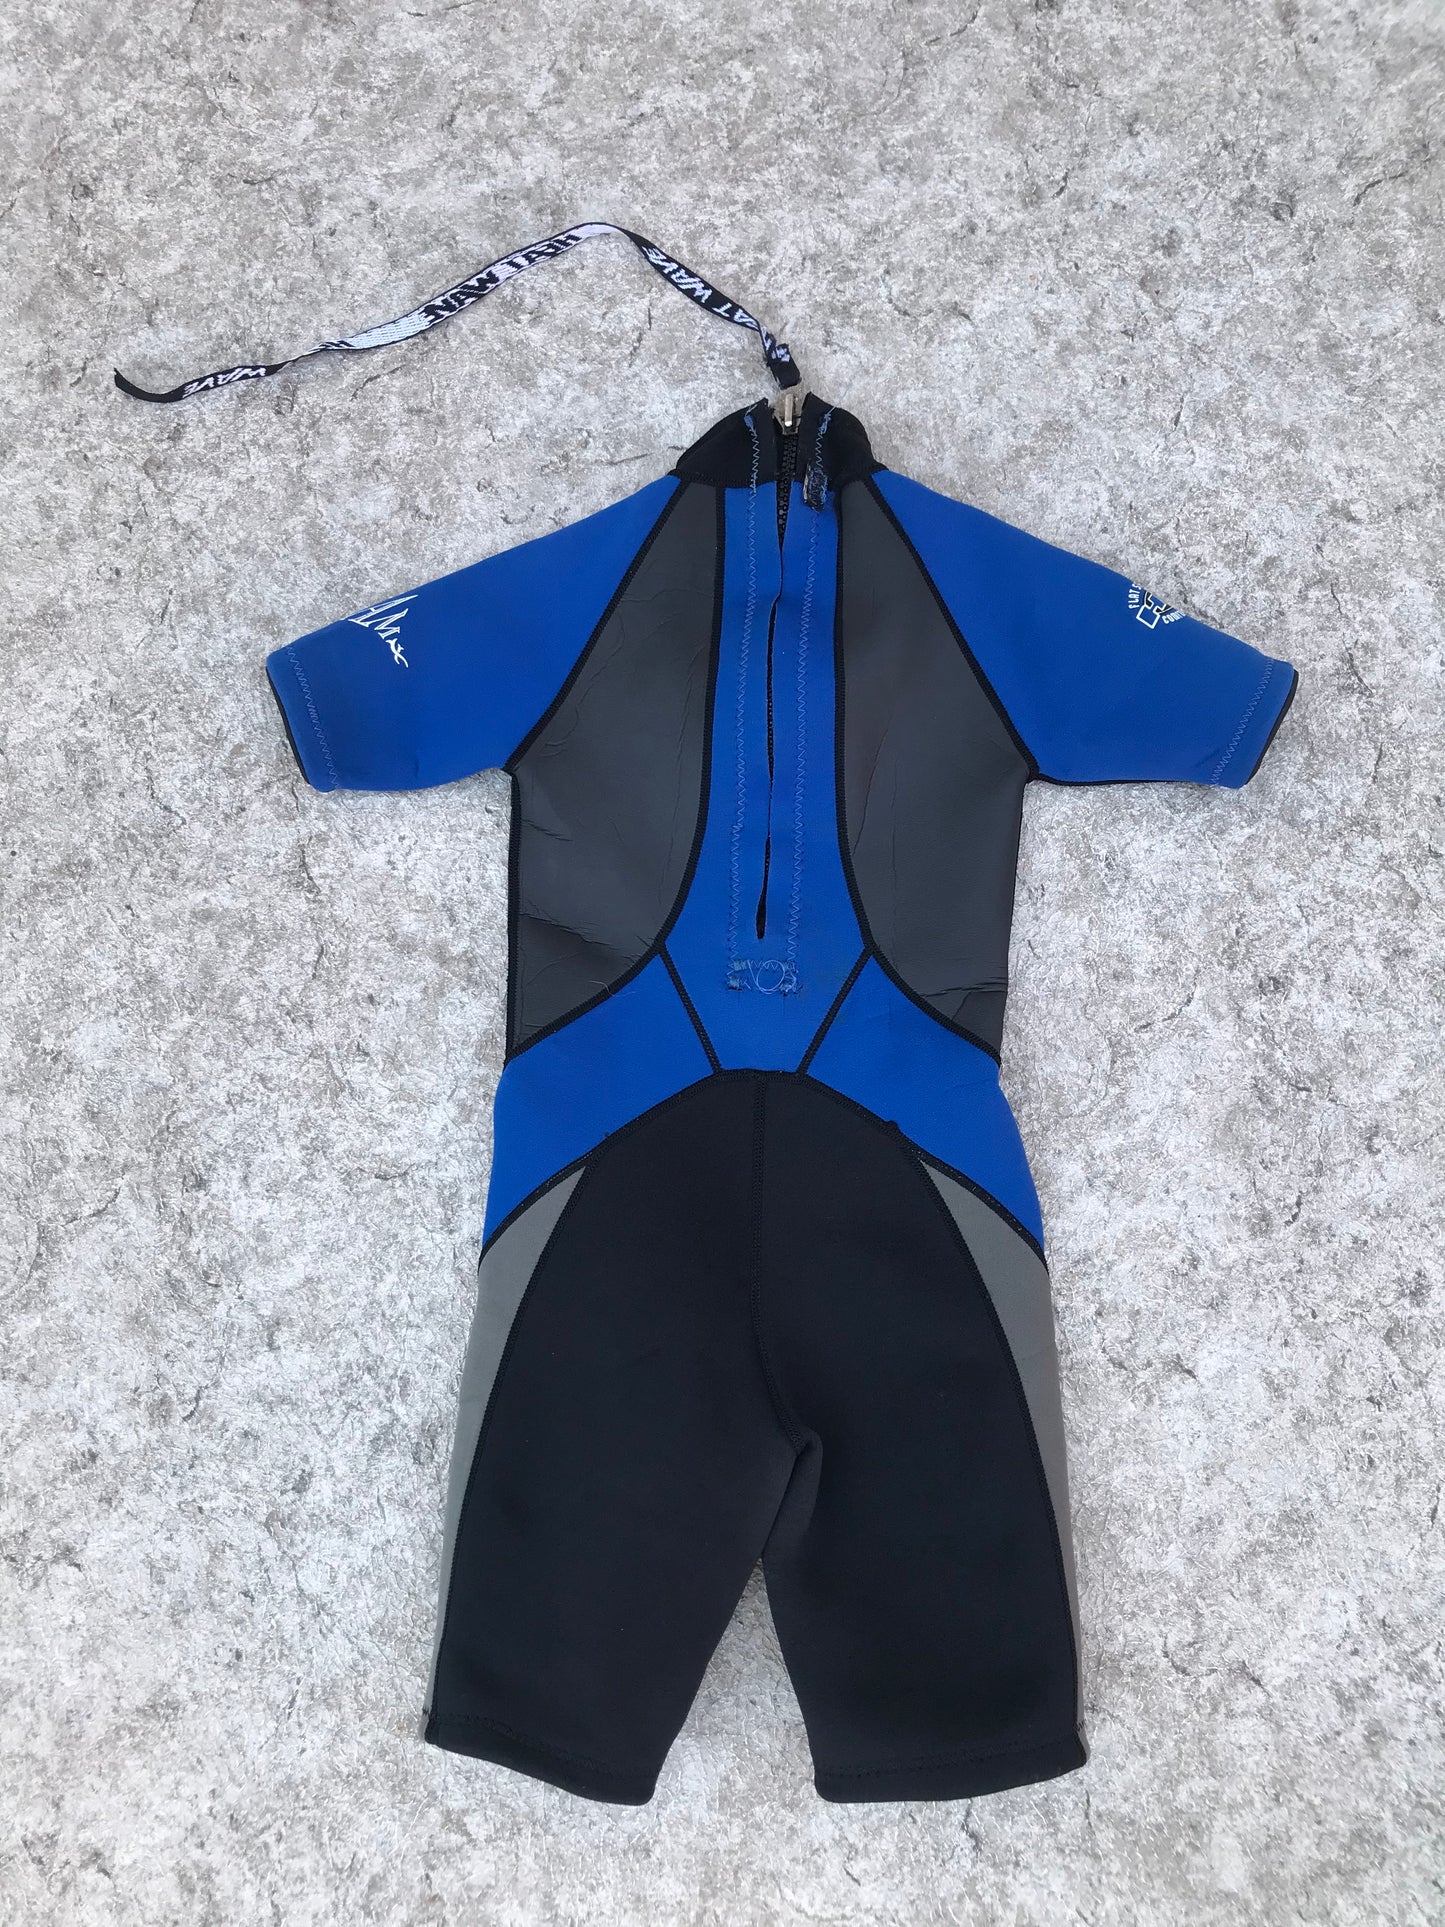 Wetsuit Child Size 8 HO Black Blue 2-3 mm As New